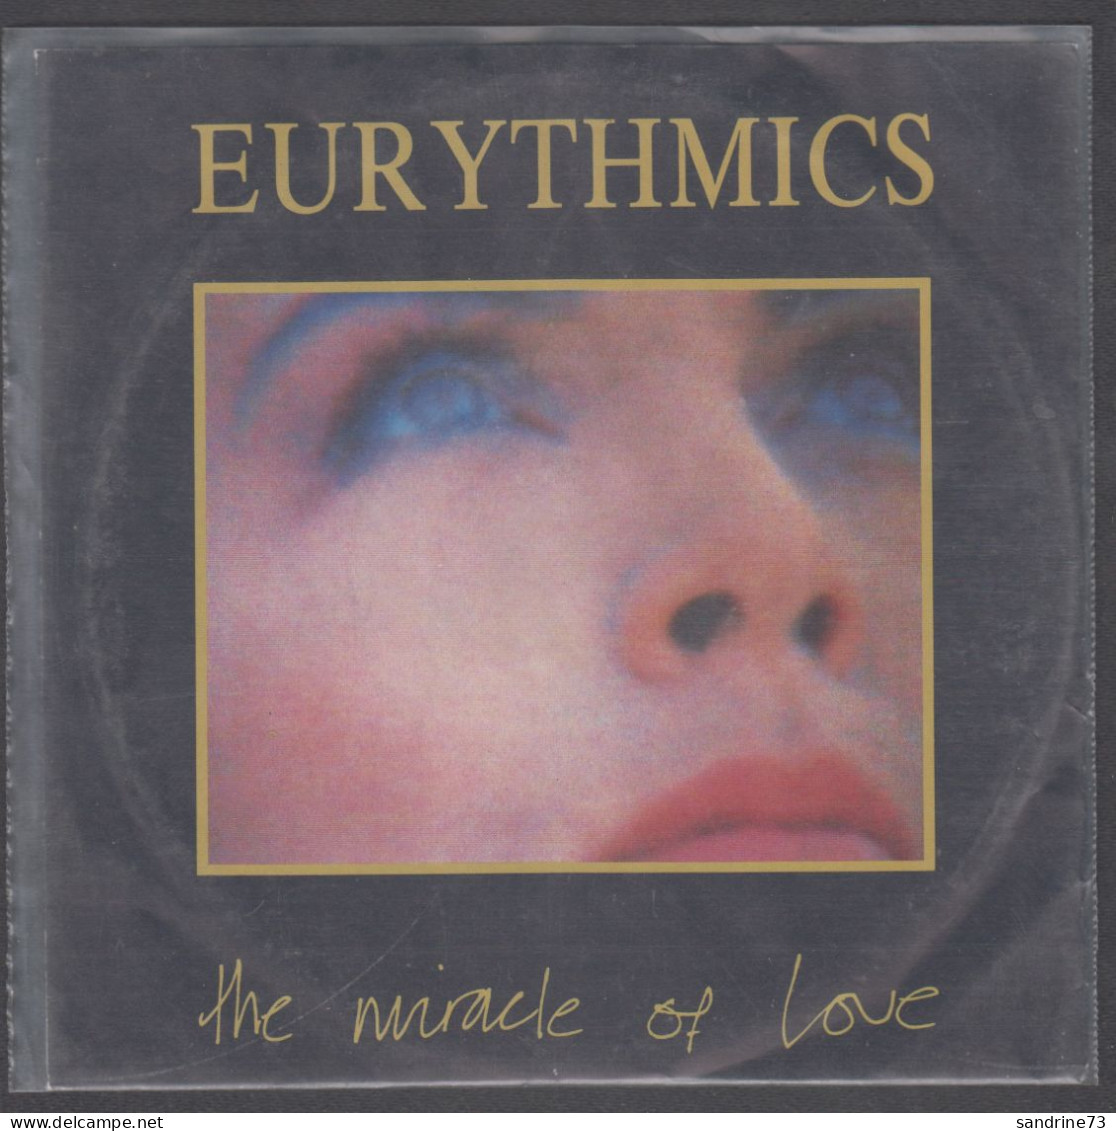 Disque Vinyle 45t - Eurythmics - The Miracle Of Love - Dance, Techno & House